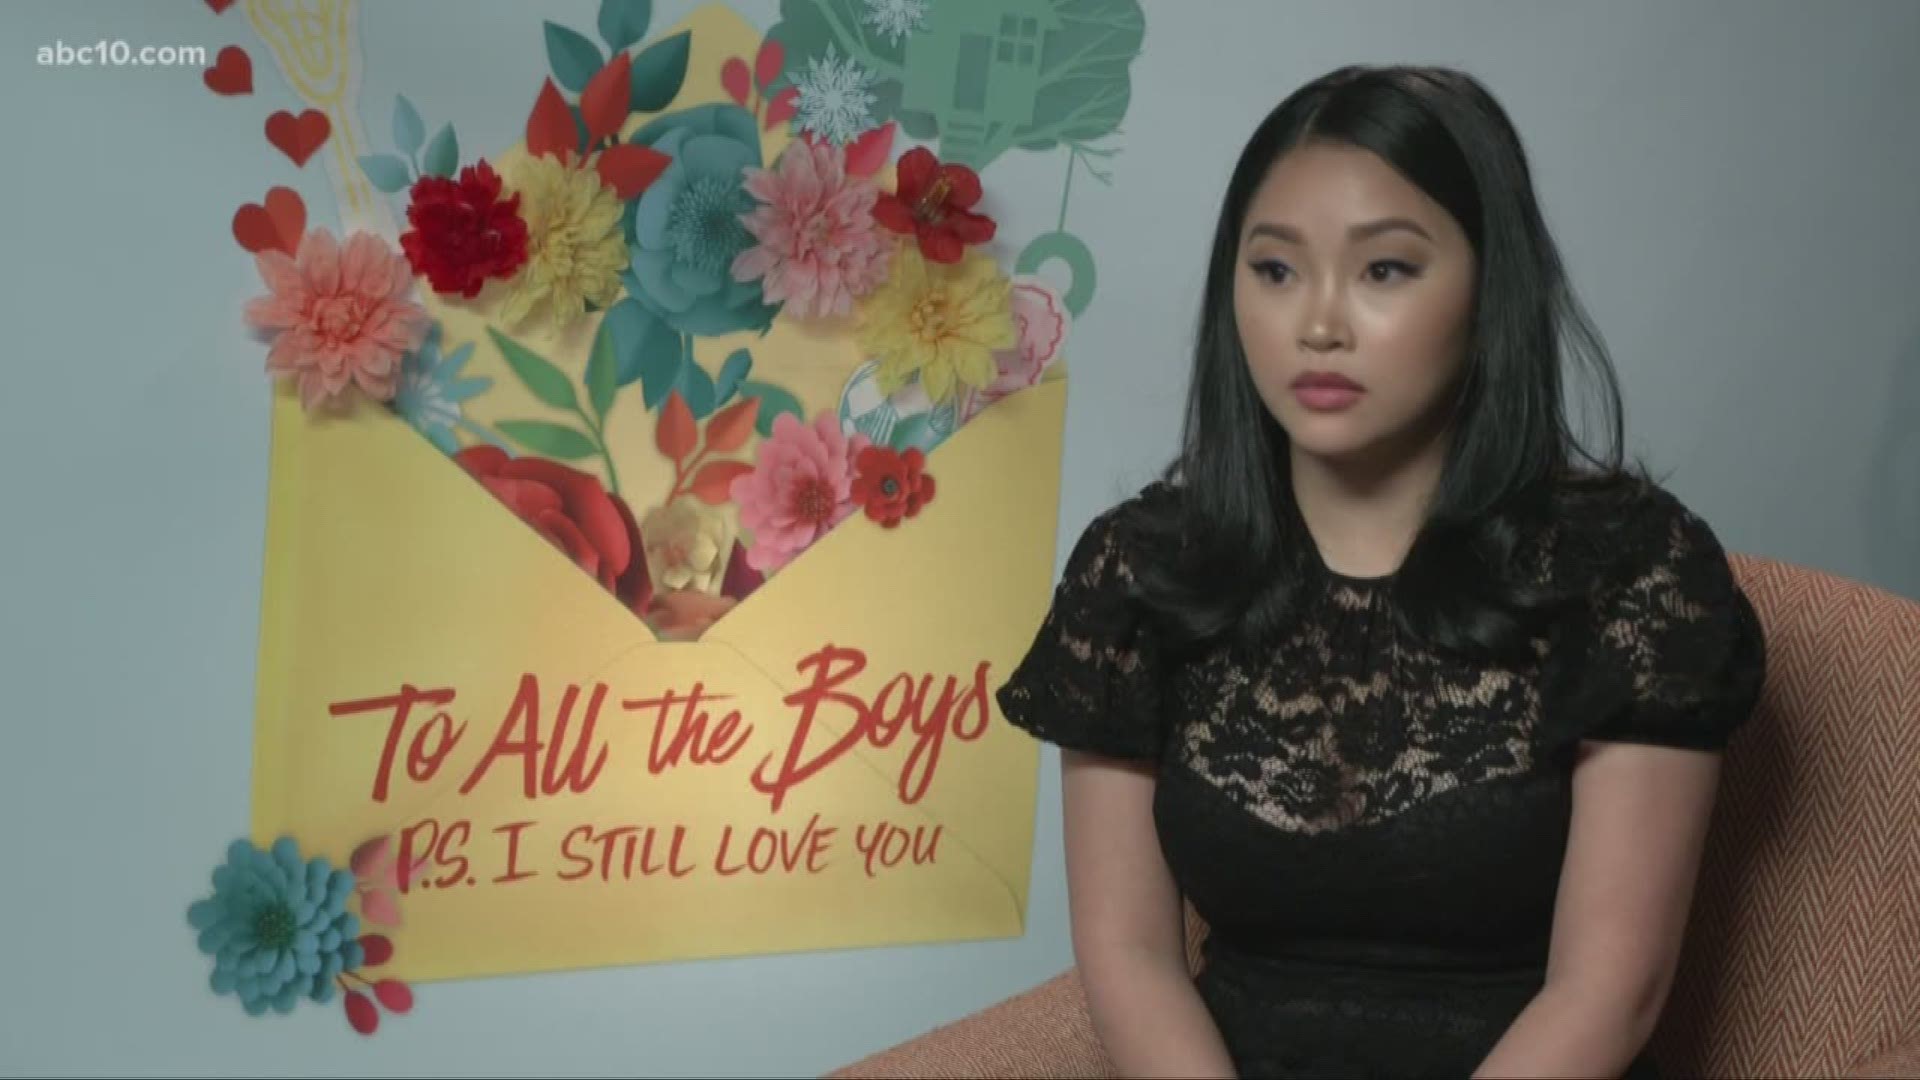 Mark S. Allen previews "To all the boys: P.S. I Still Love You", the much-anticipated sequel to Netflix's most watched original content.